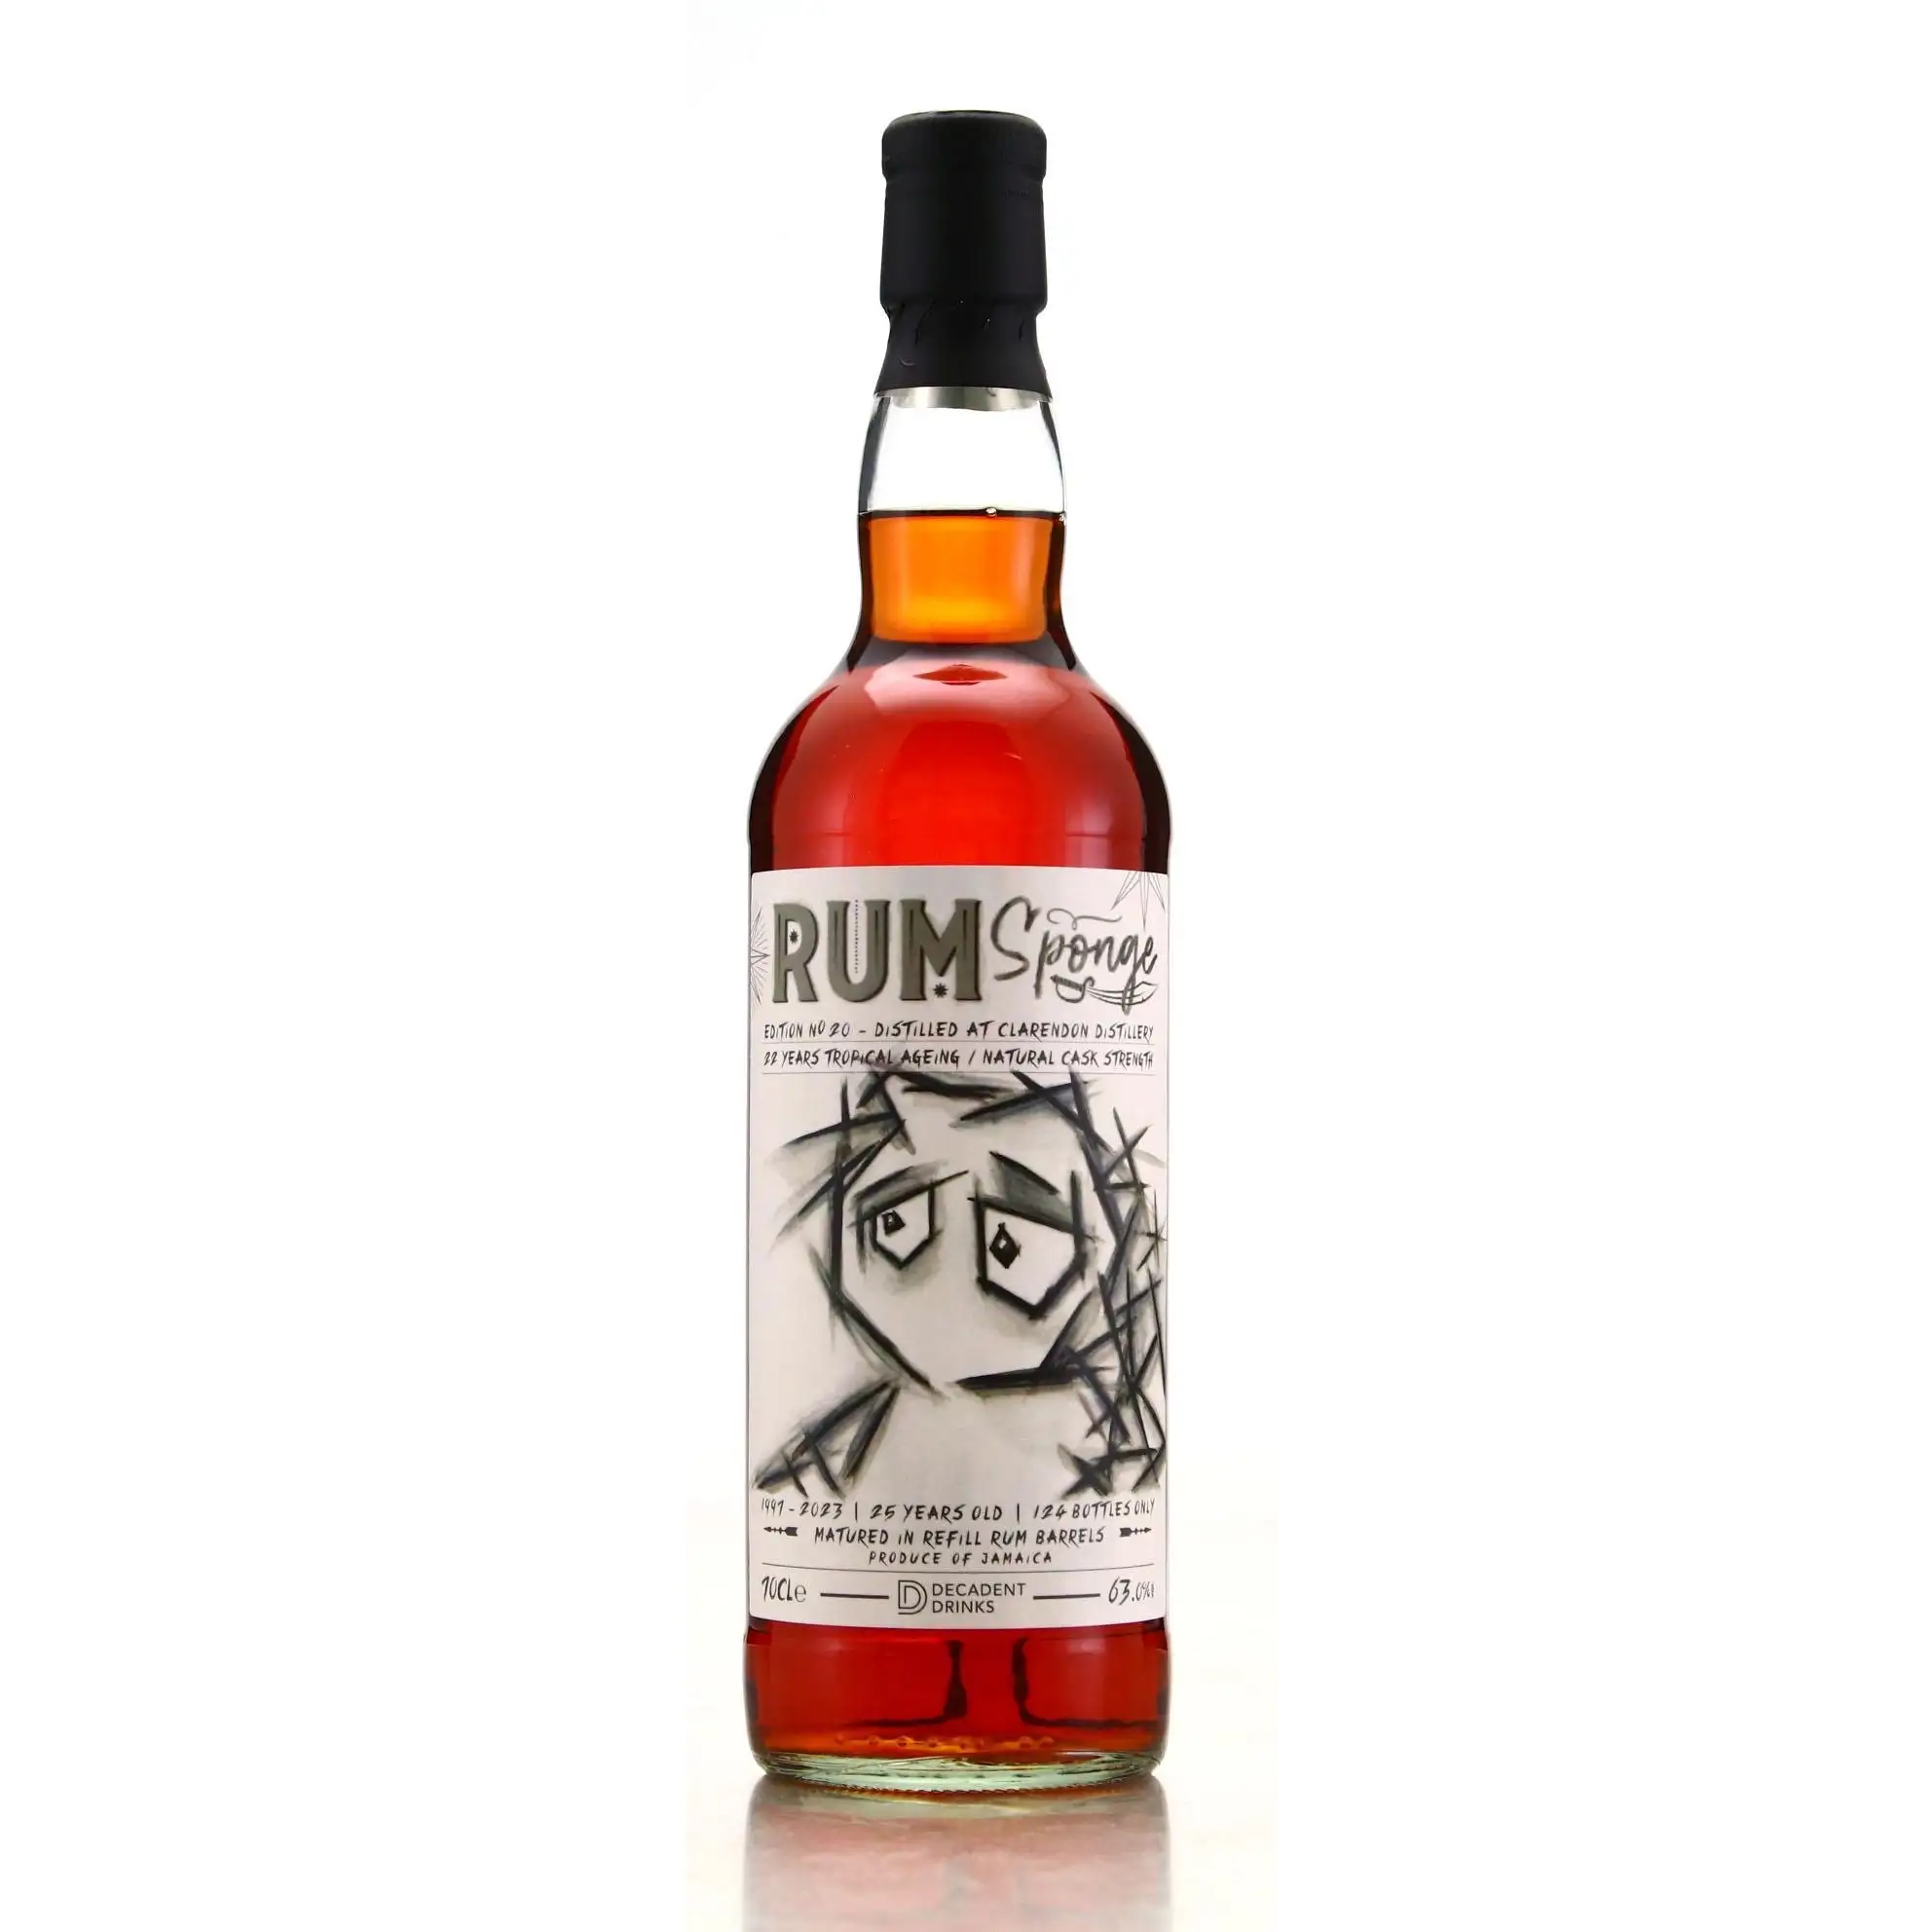 Image of the front of the bottle of the rum Rum Sponge No. 20